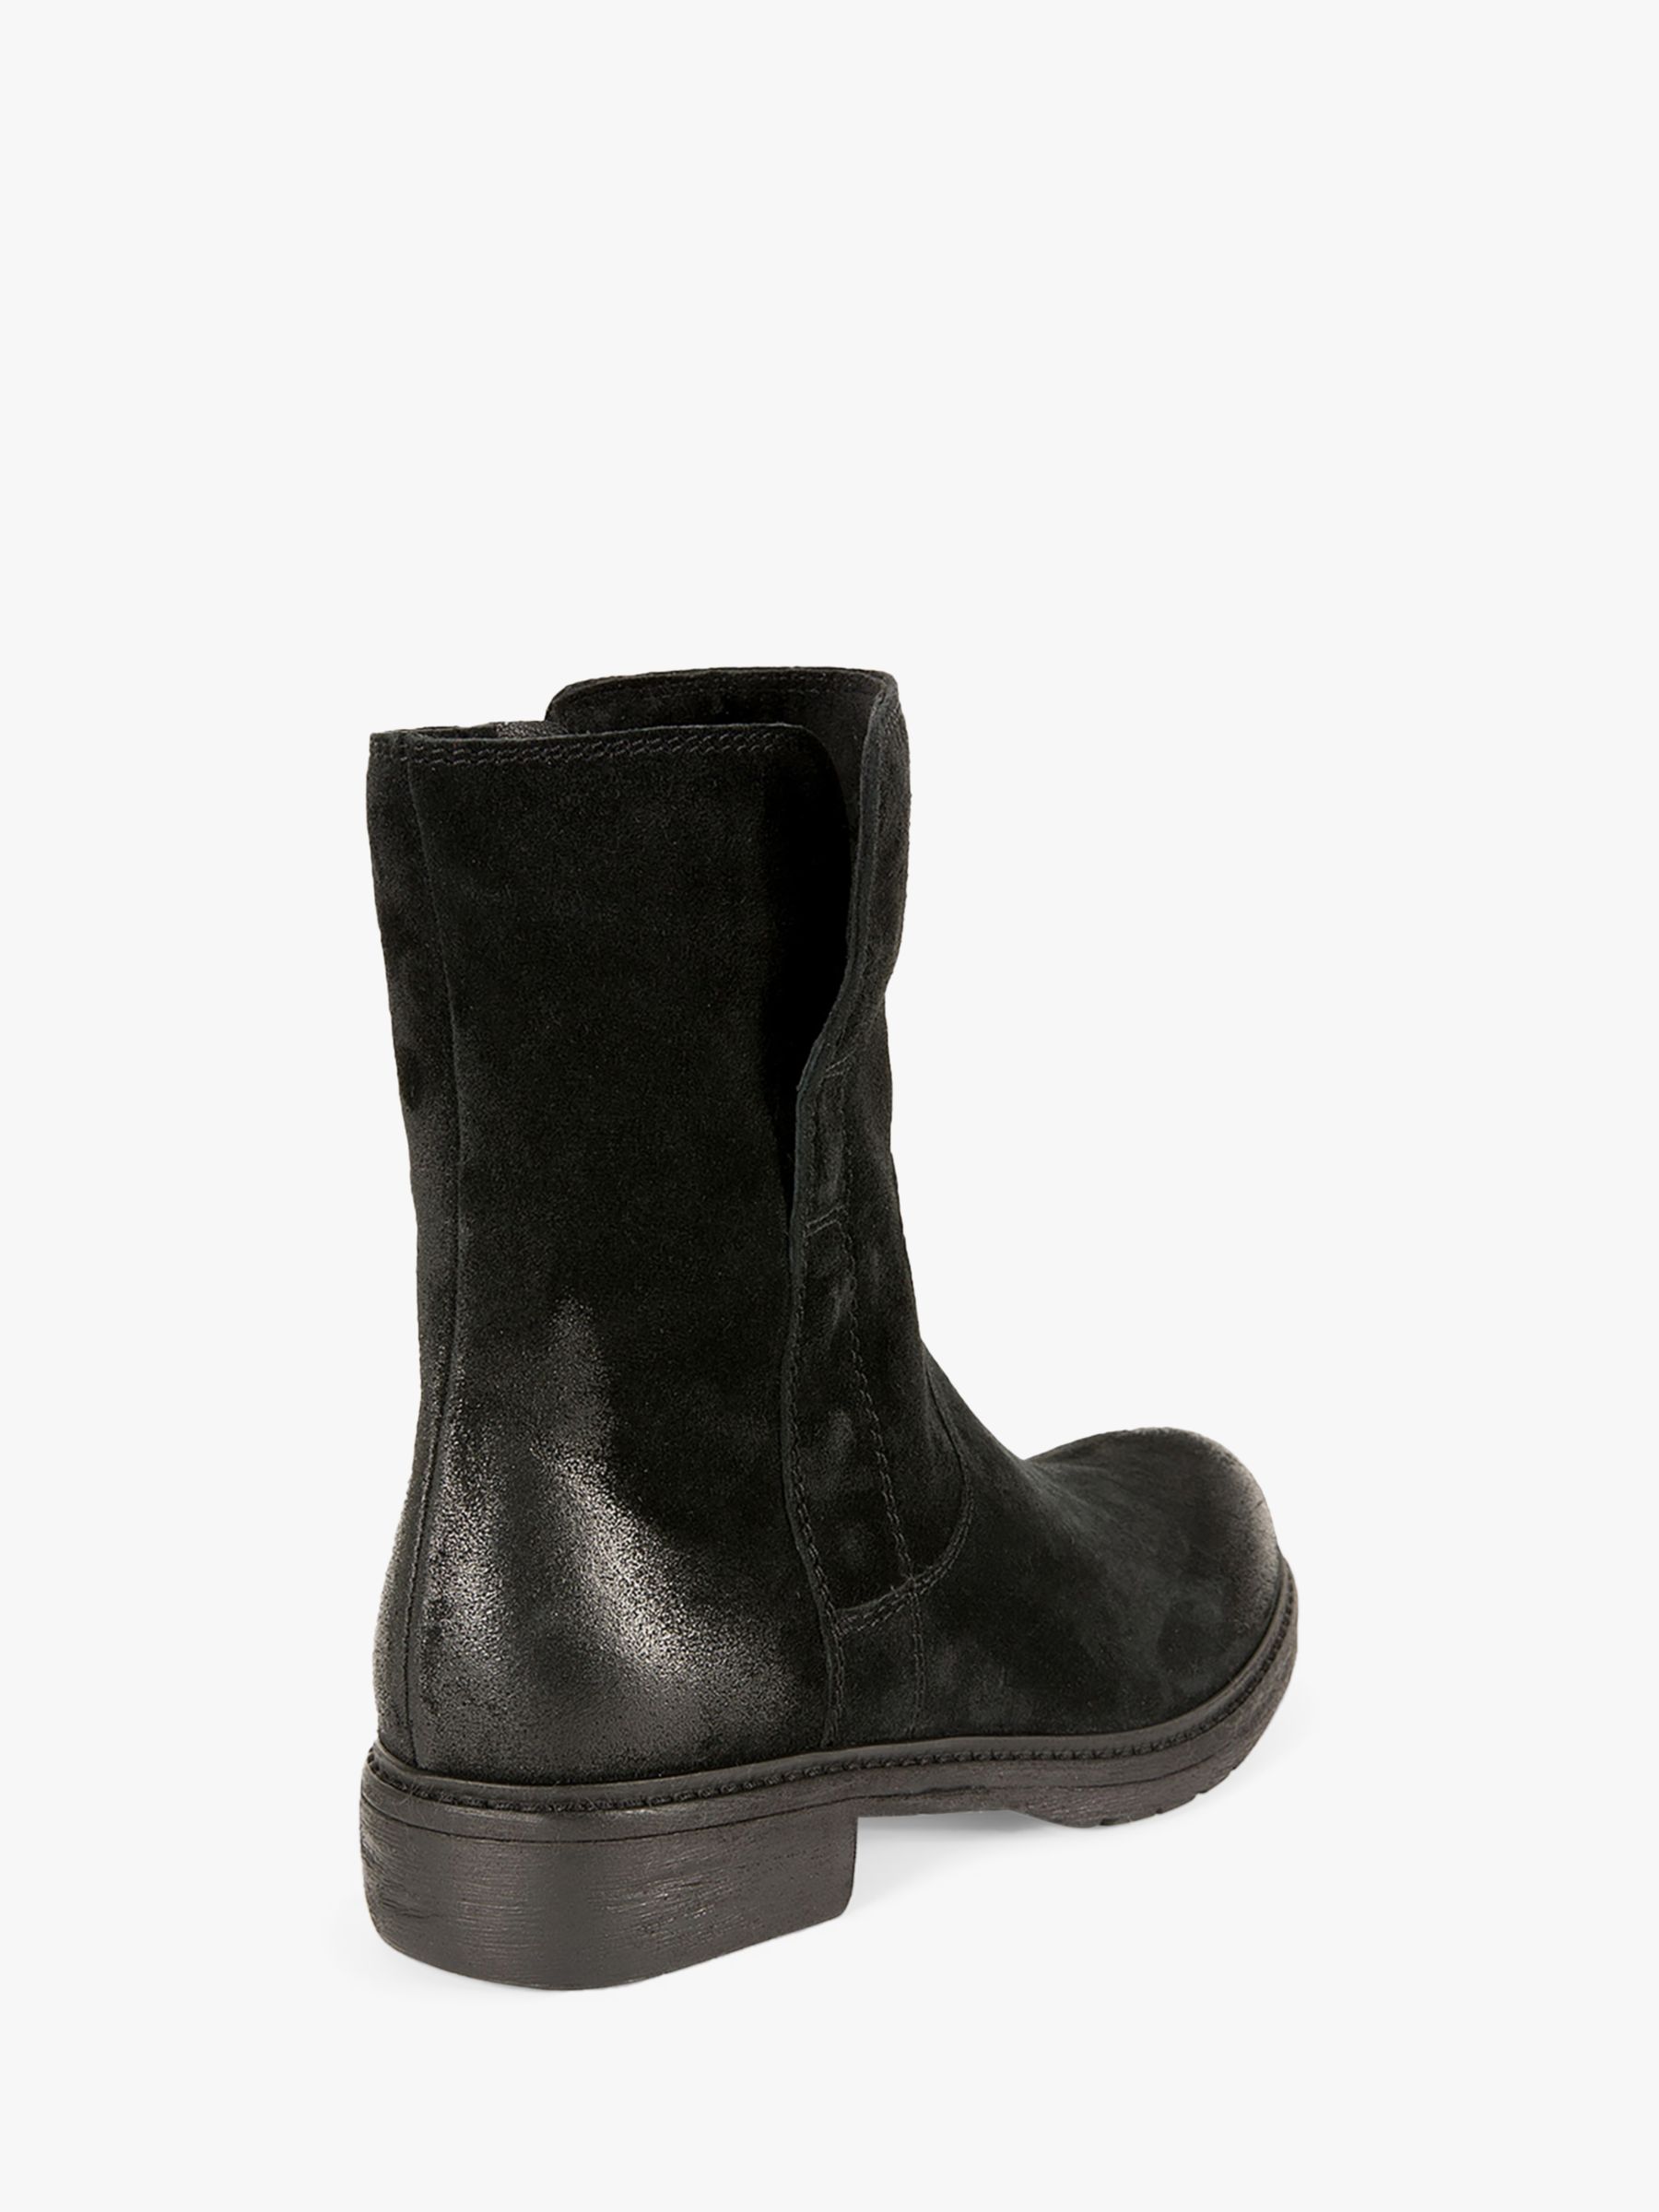 Celtic & Co. Essential Leather Ankle Boots, Black at John Lewis & Partners